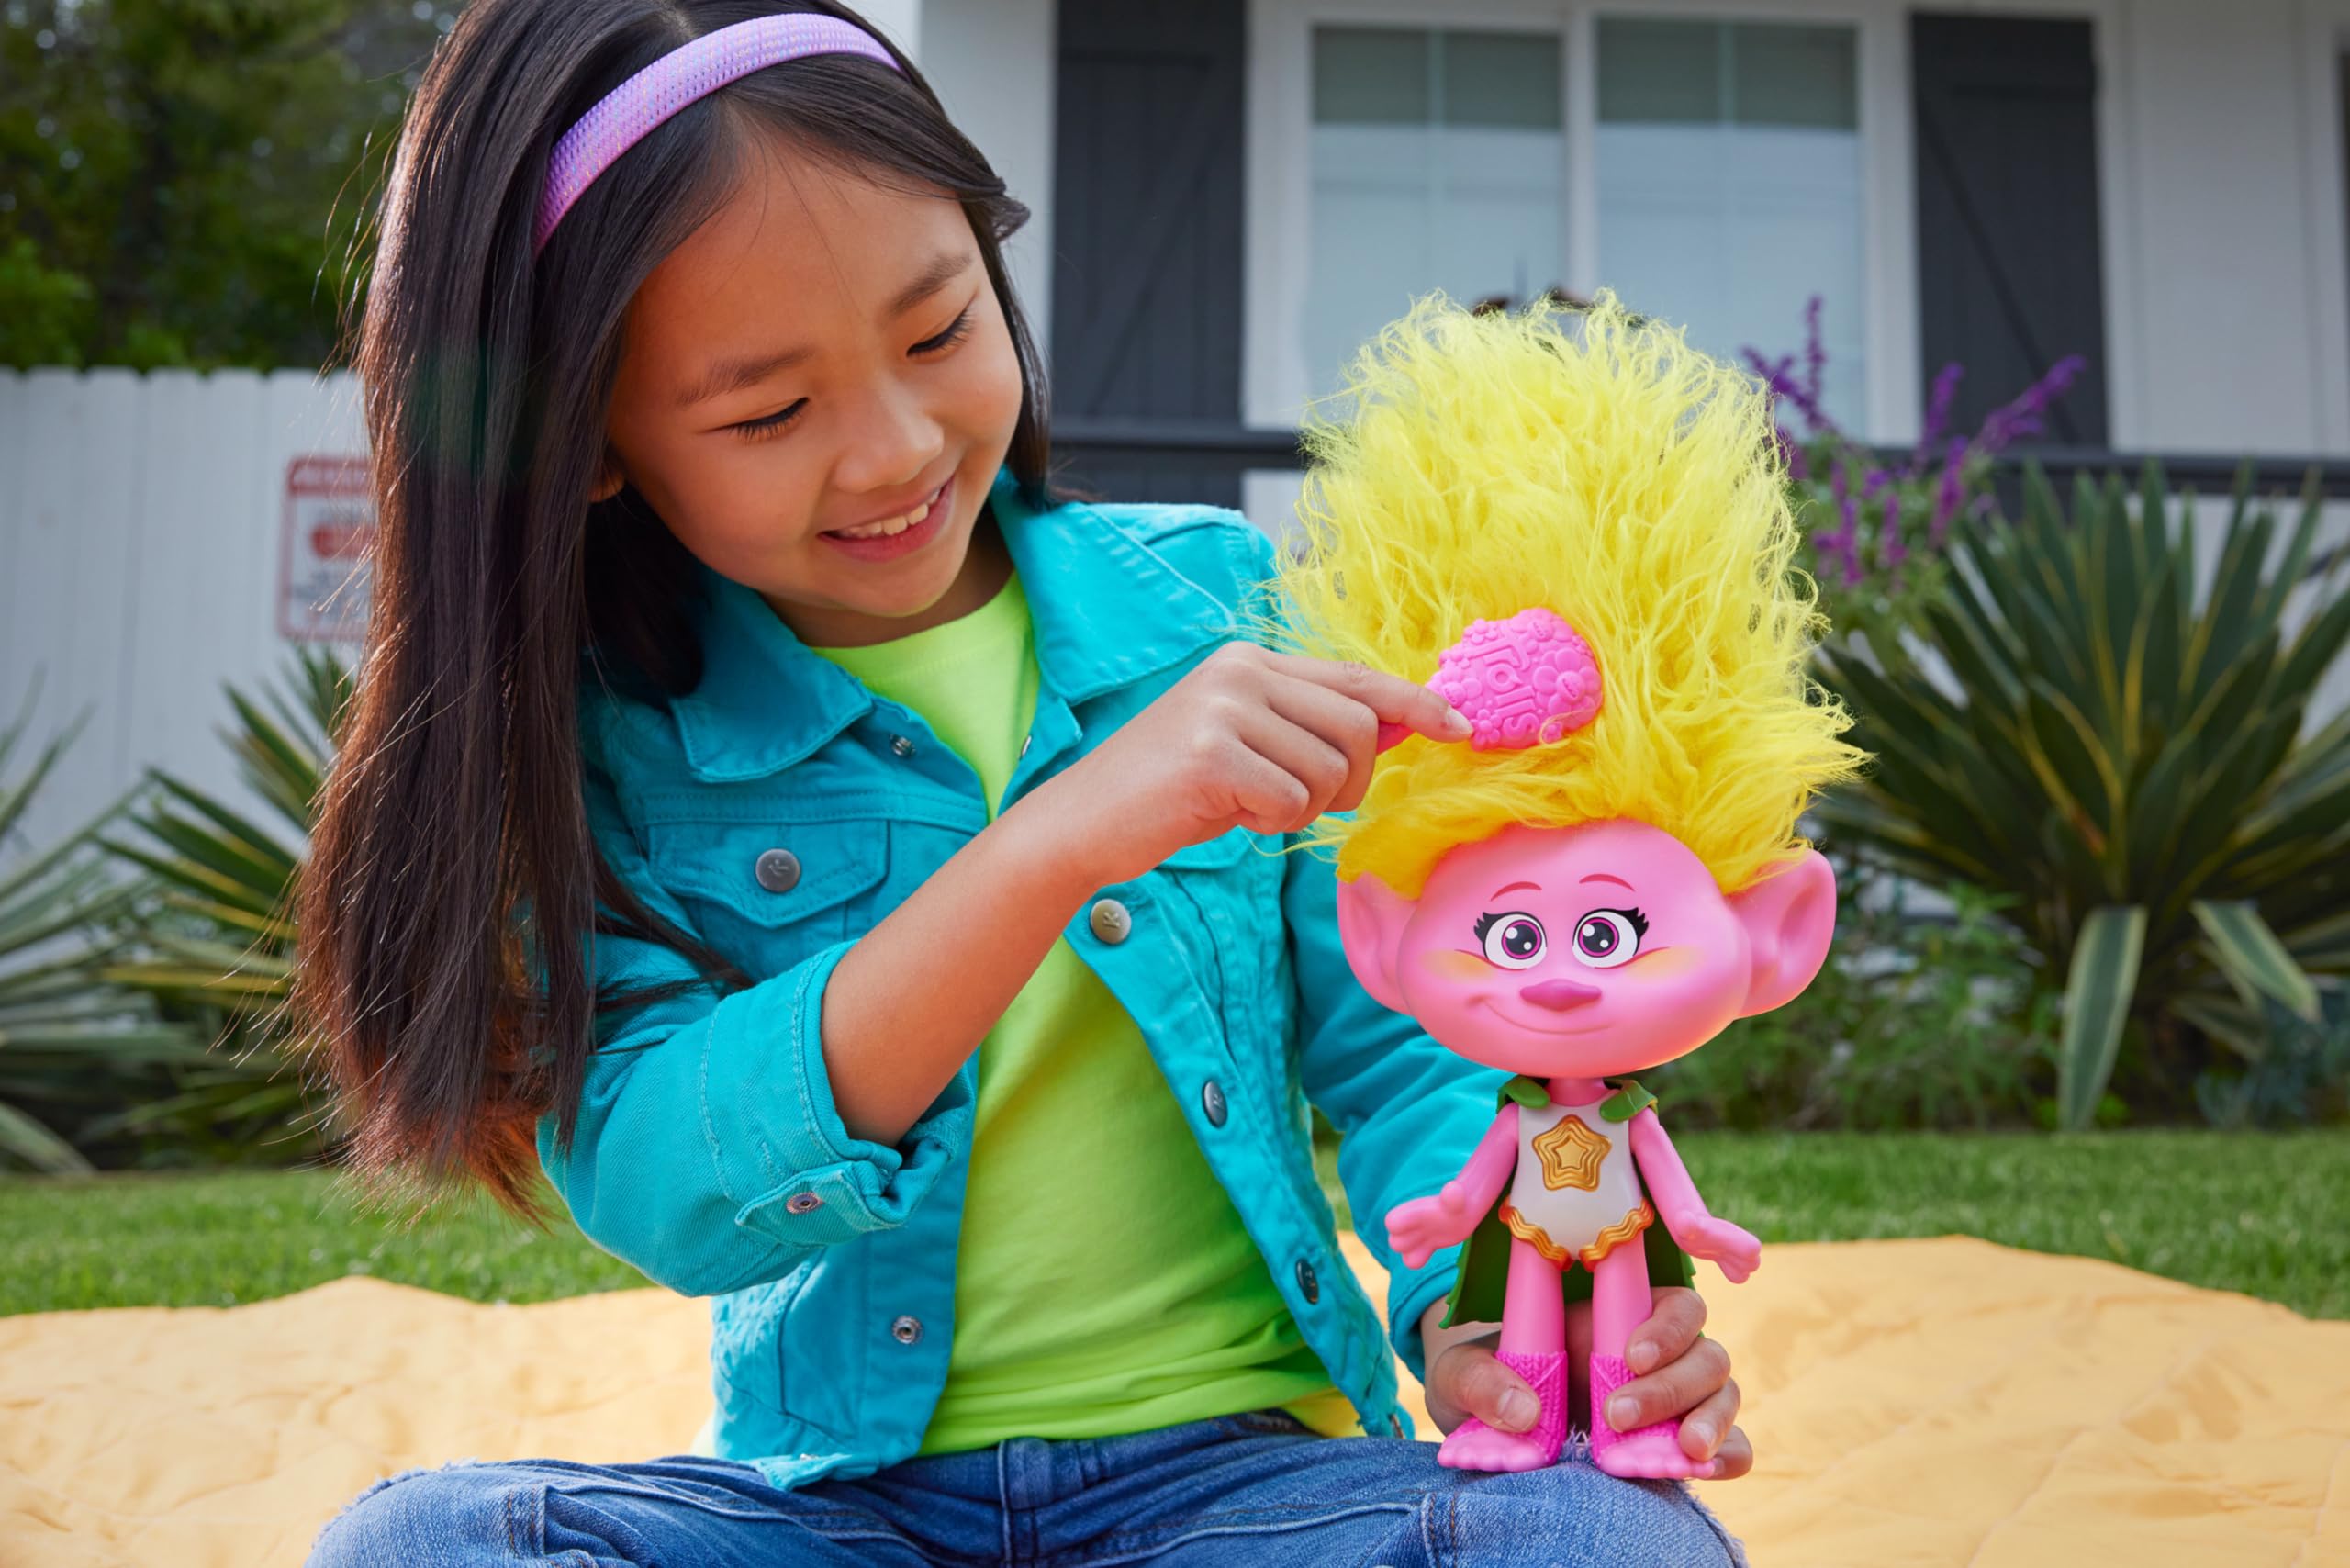 Mattel DreamWorks Trolls Band Together Rainbow HairTunes Viva Doll, Doll & Cape Accessory with Light-Up Hair, Music & Sounds